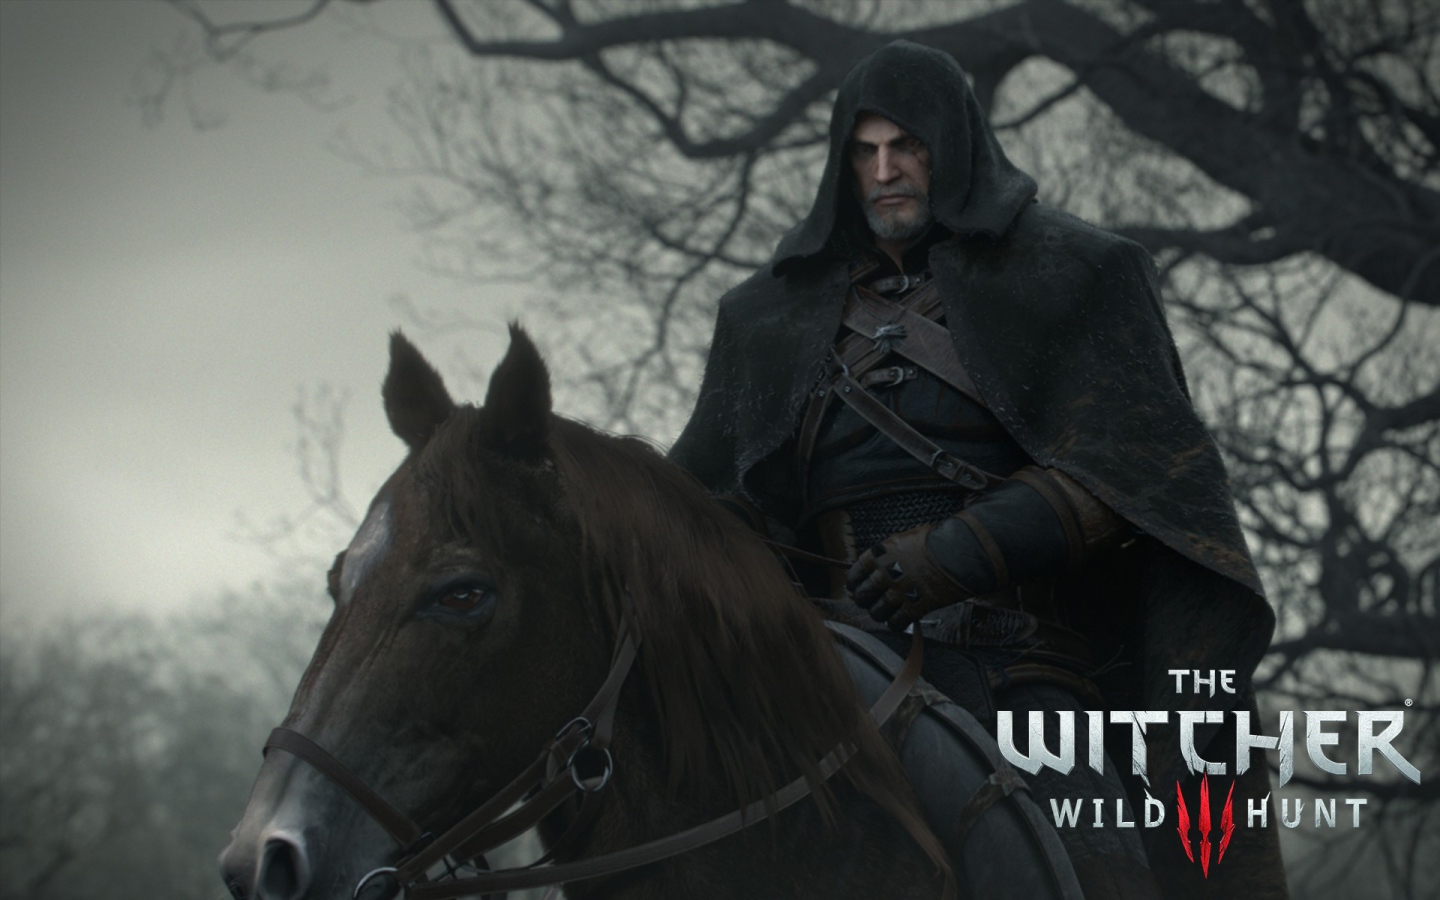 Black Rider in the game The Witcher 3 Wild Hunt